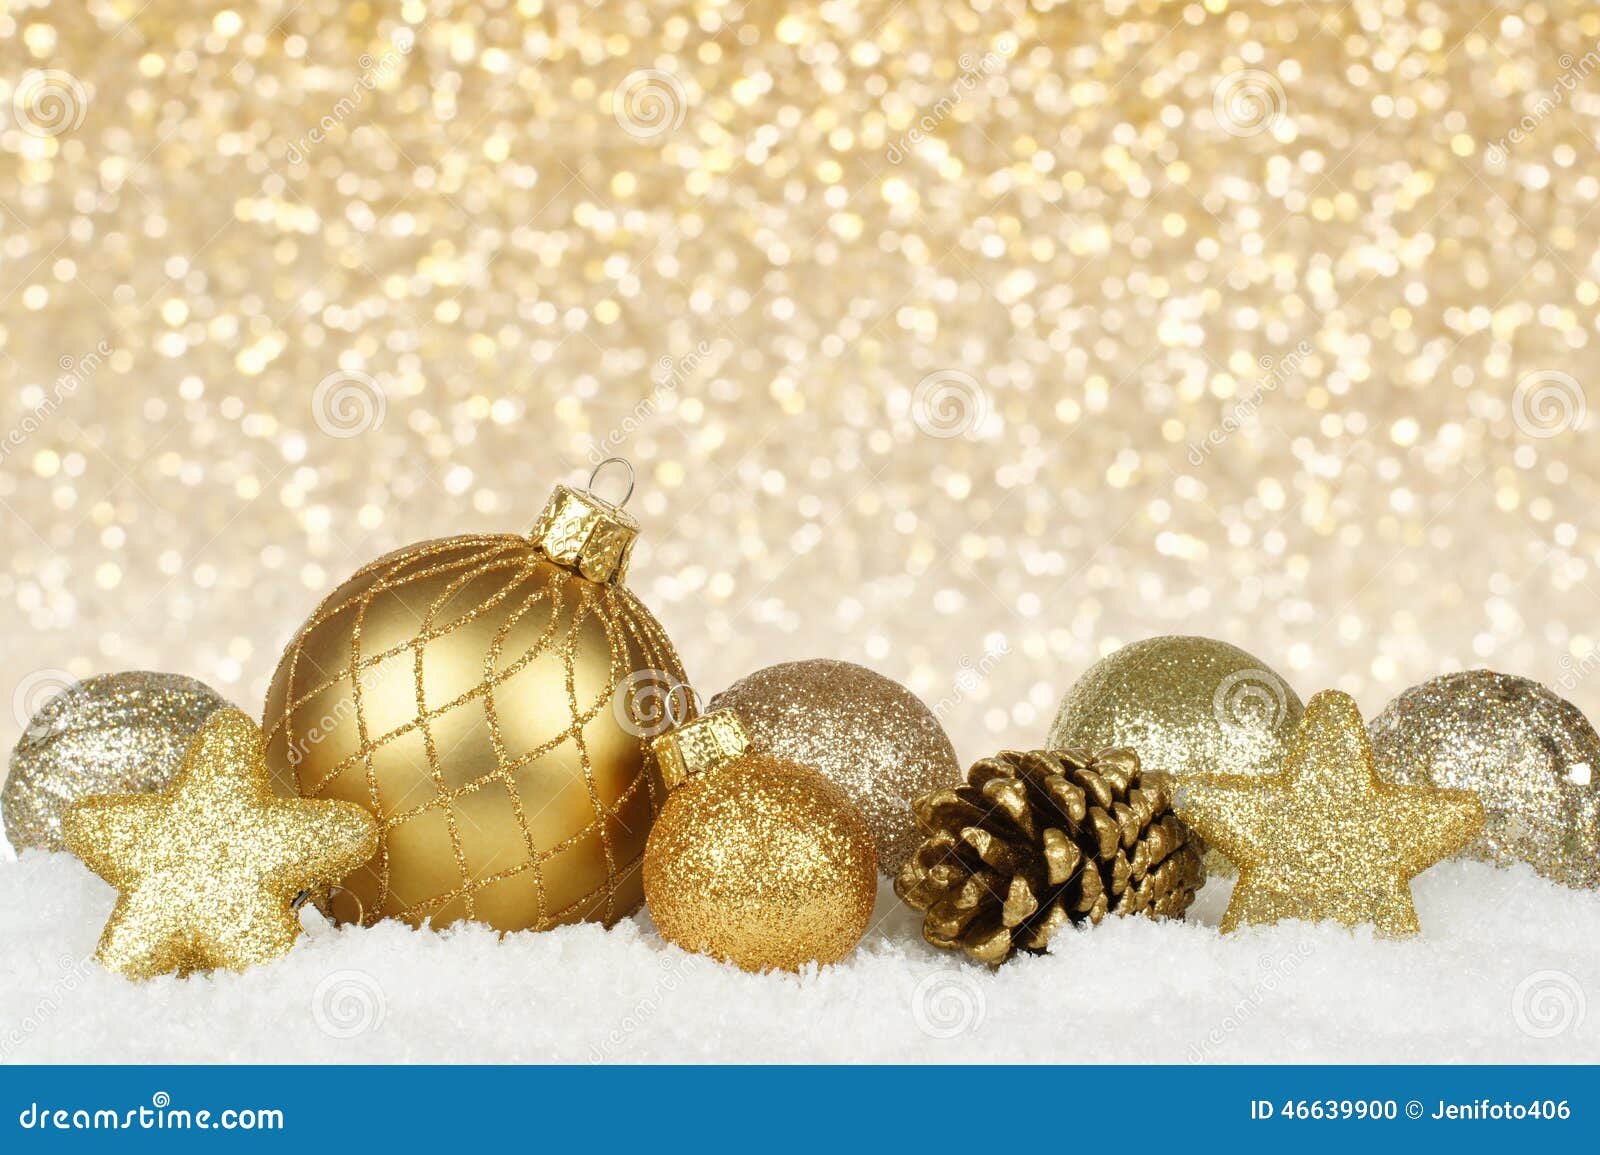 Gold Christmas Ornaments with Twinkling Background Stock Photo - Image of  festive, group: 46639900